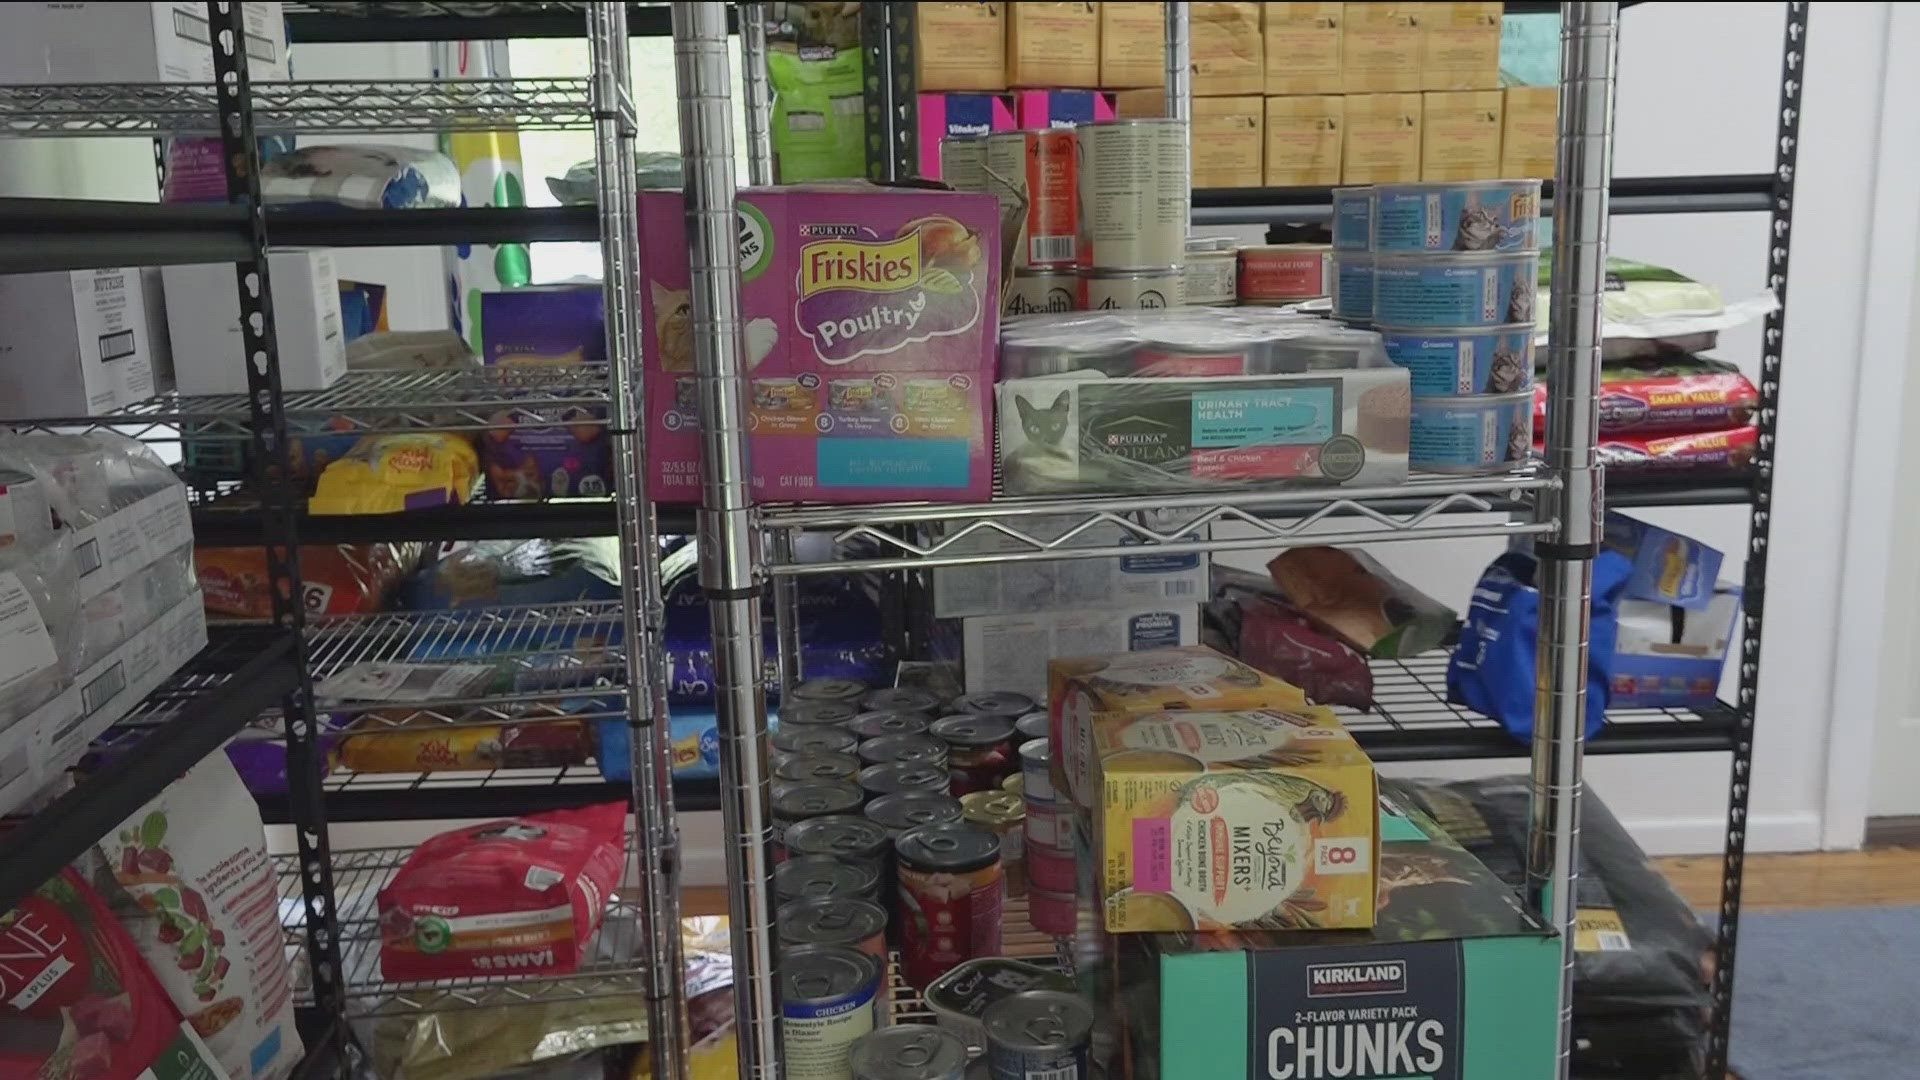 The pantry serves many purposes, including eliminating the barrier that food costs may present to pet owners and keeping animals from ending up in shelters.